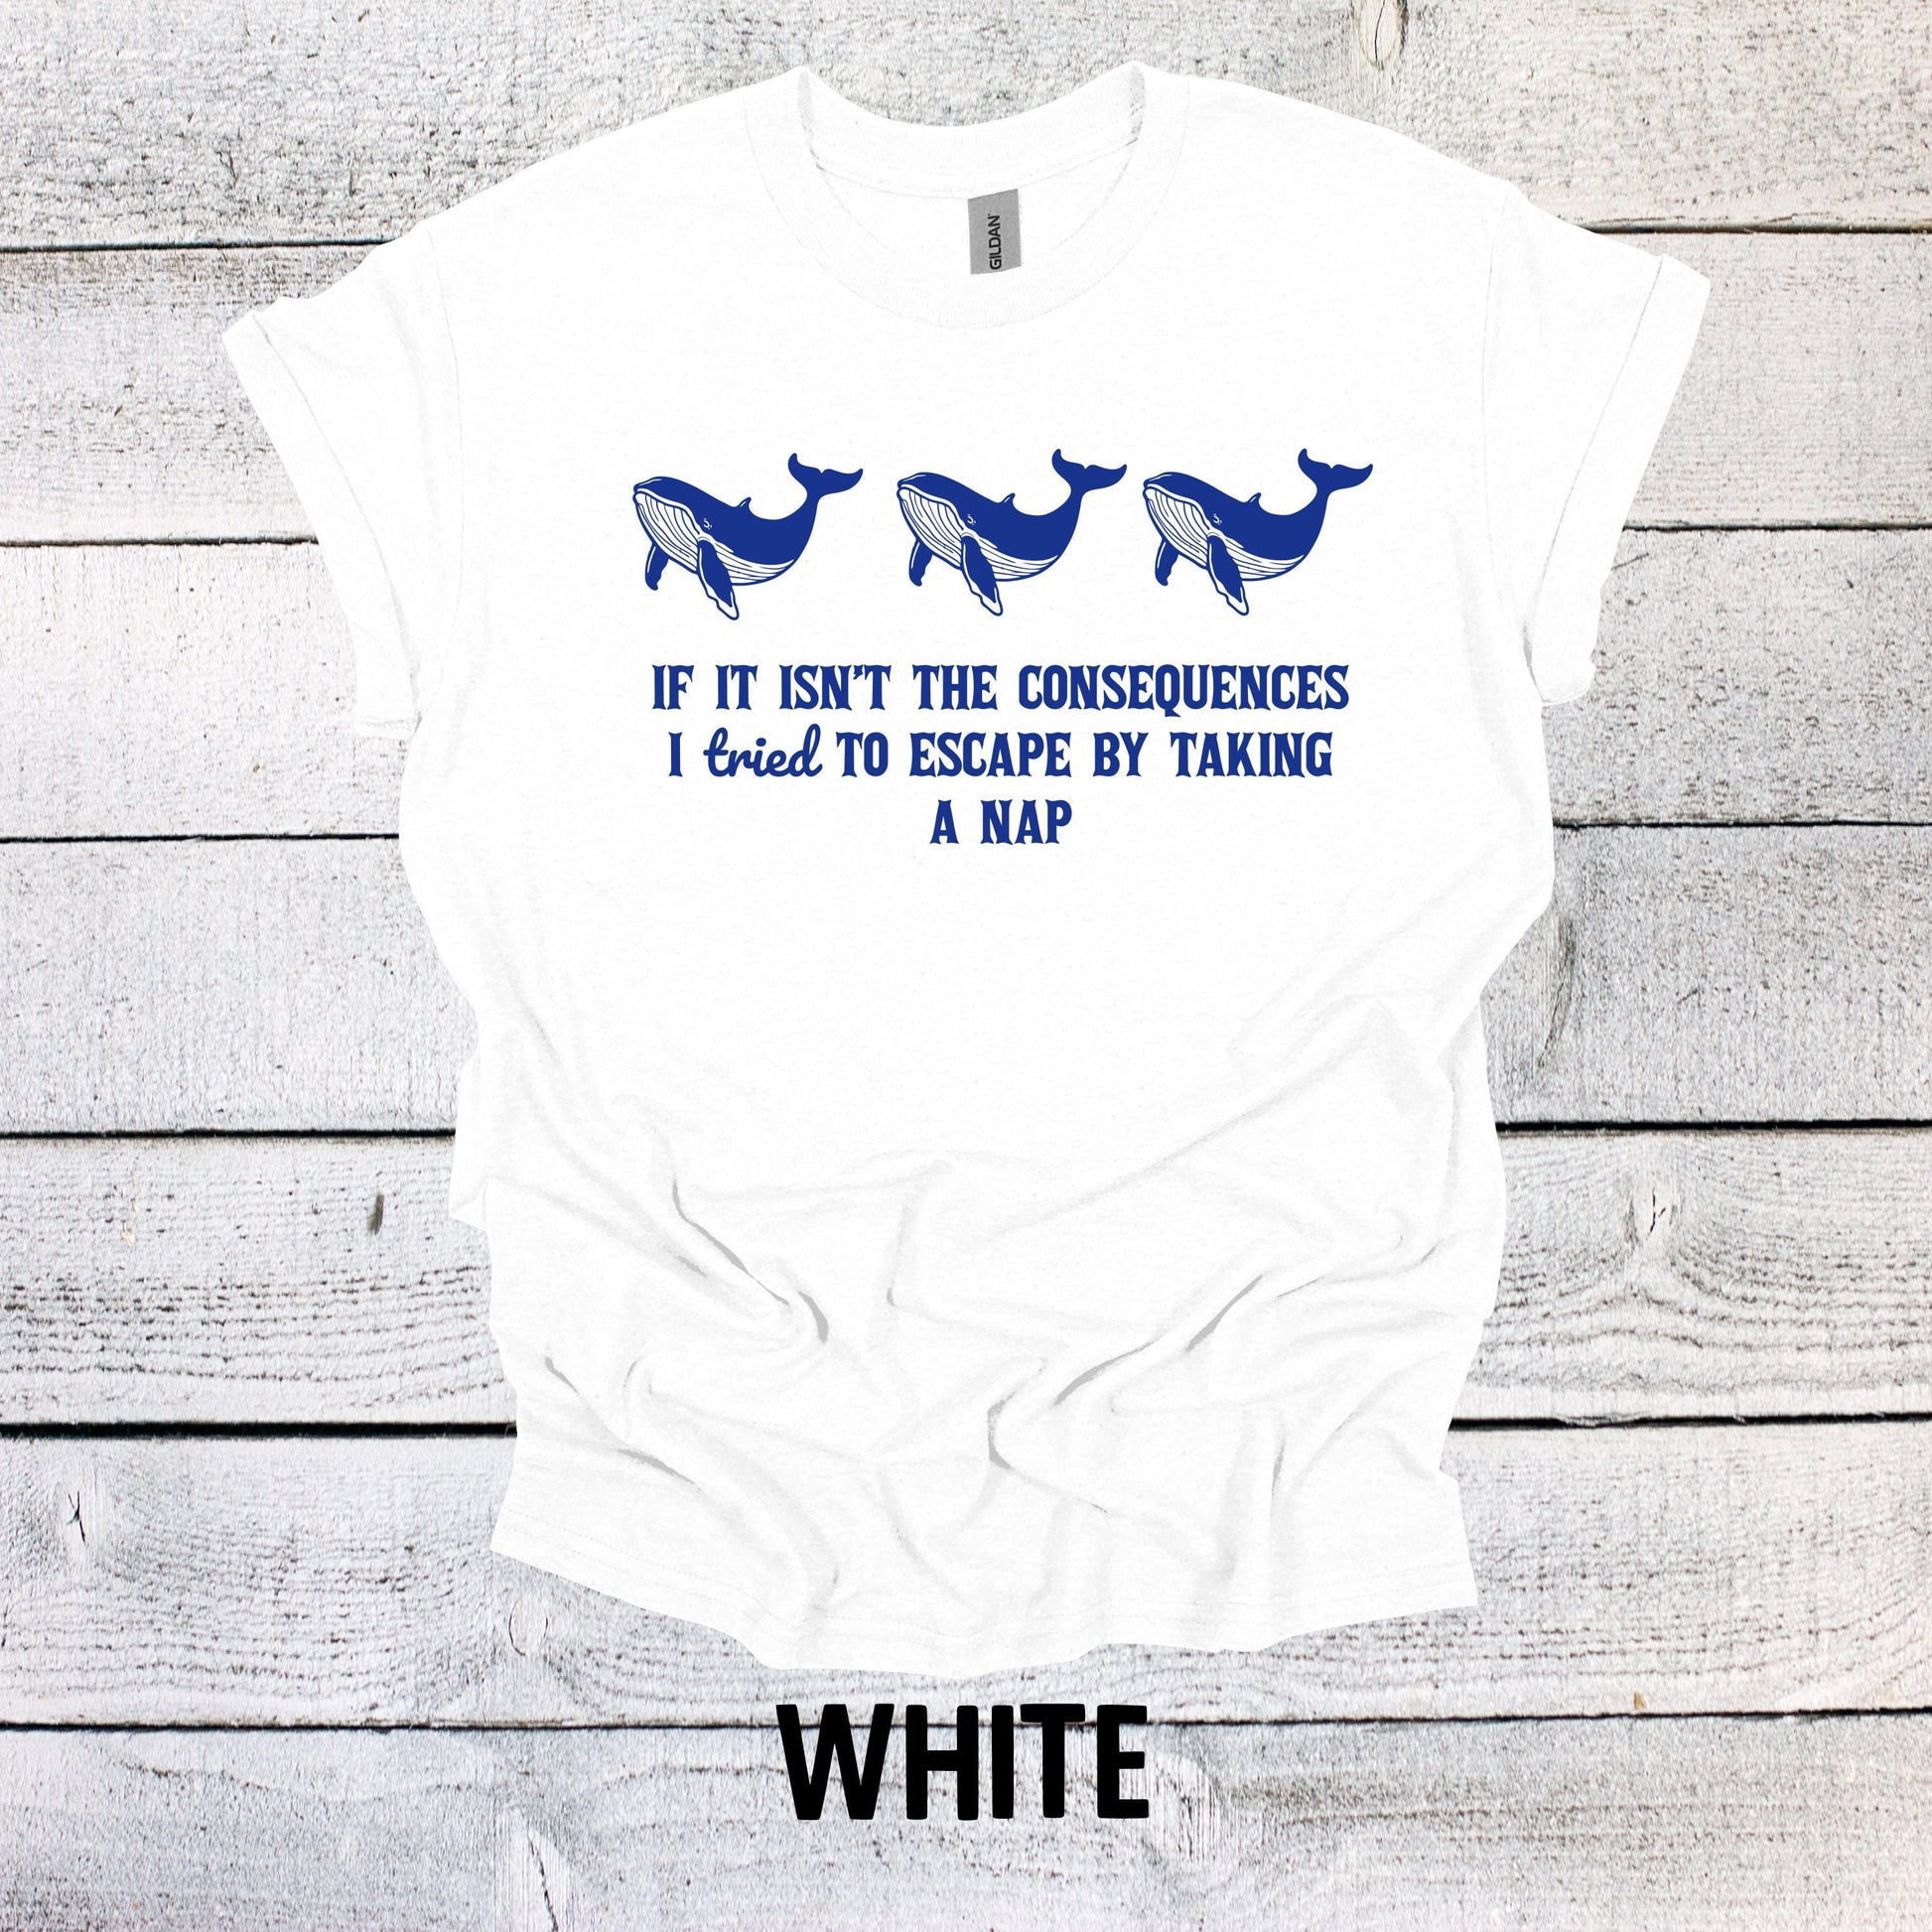 Whale Whale Whale if it isn't the consequences Shirt Graphic Shirt Adult Vintage Funny Shirt Nostalgia Cotton Shirt Minimalist Shirt